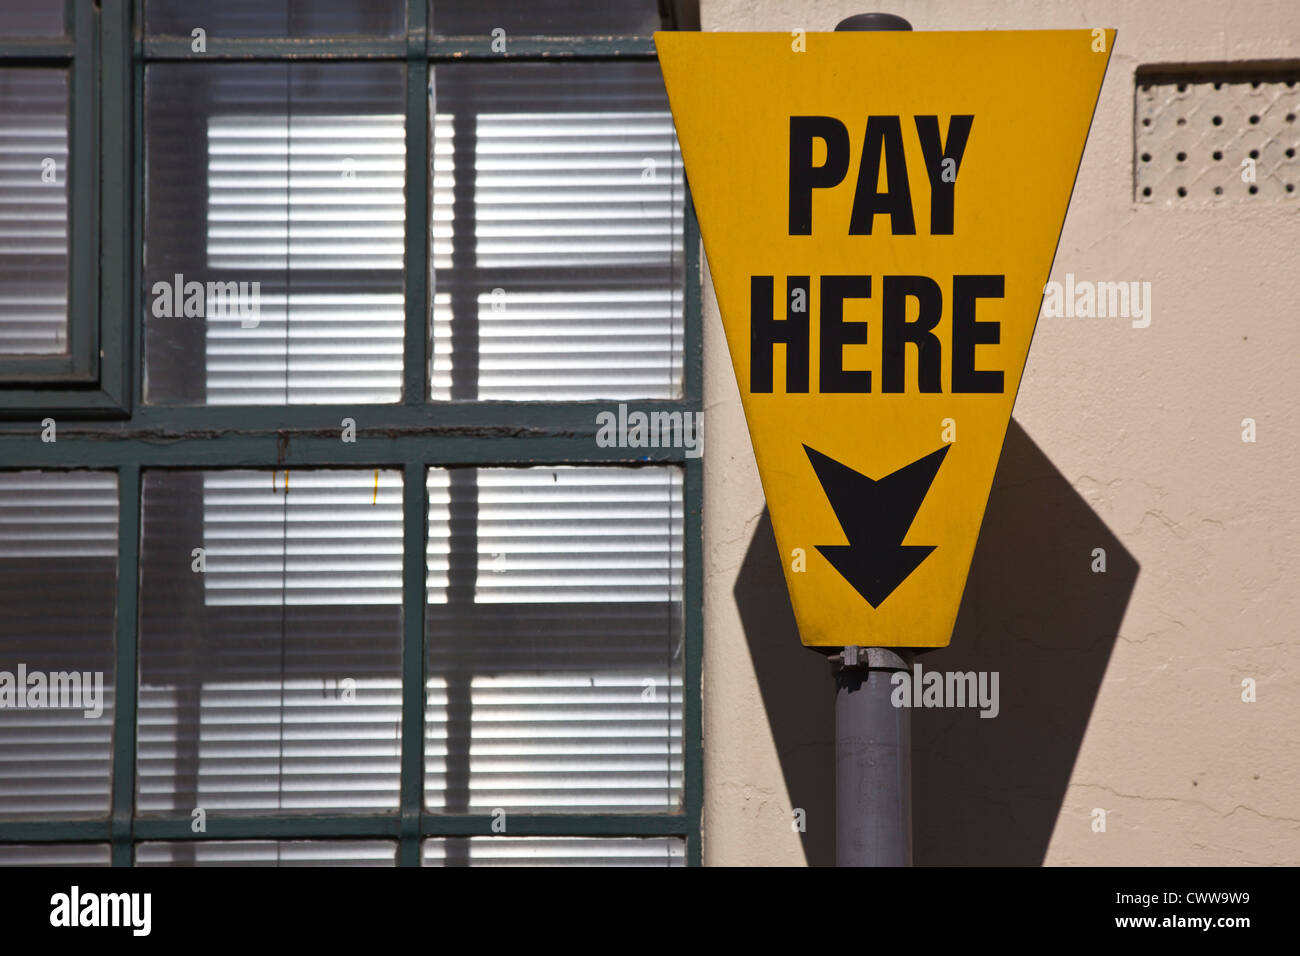 'Pay Here' sign indicates where to pay for Parking in London Stock Photo